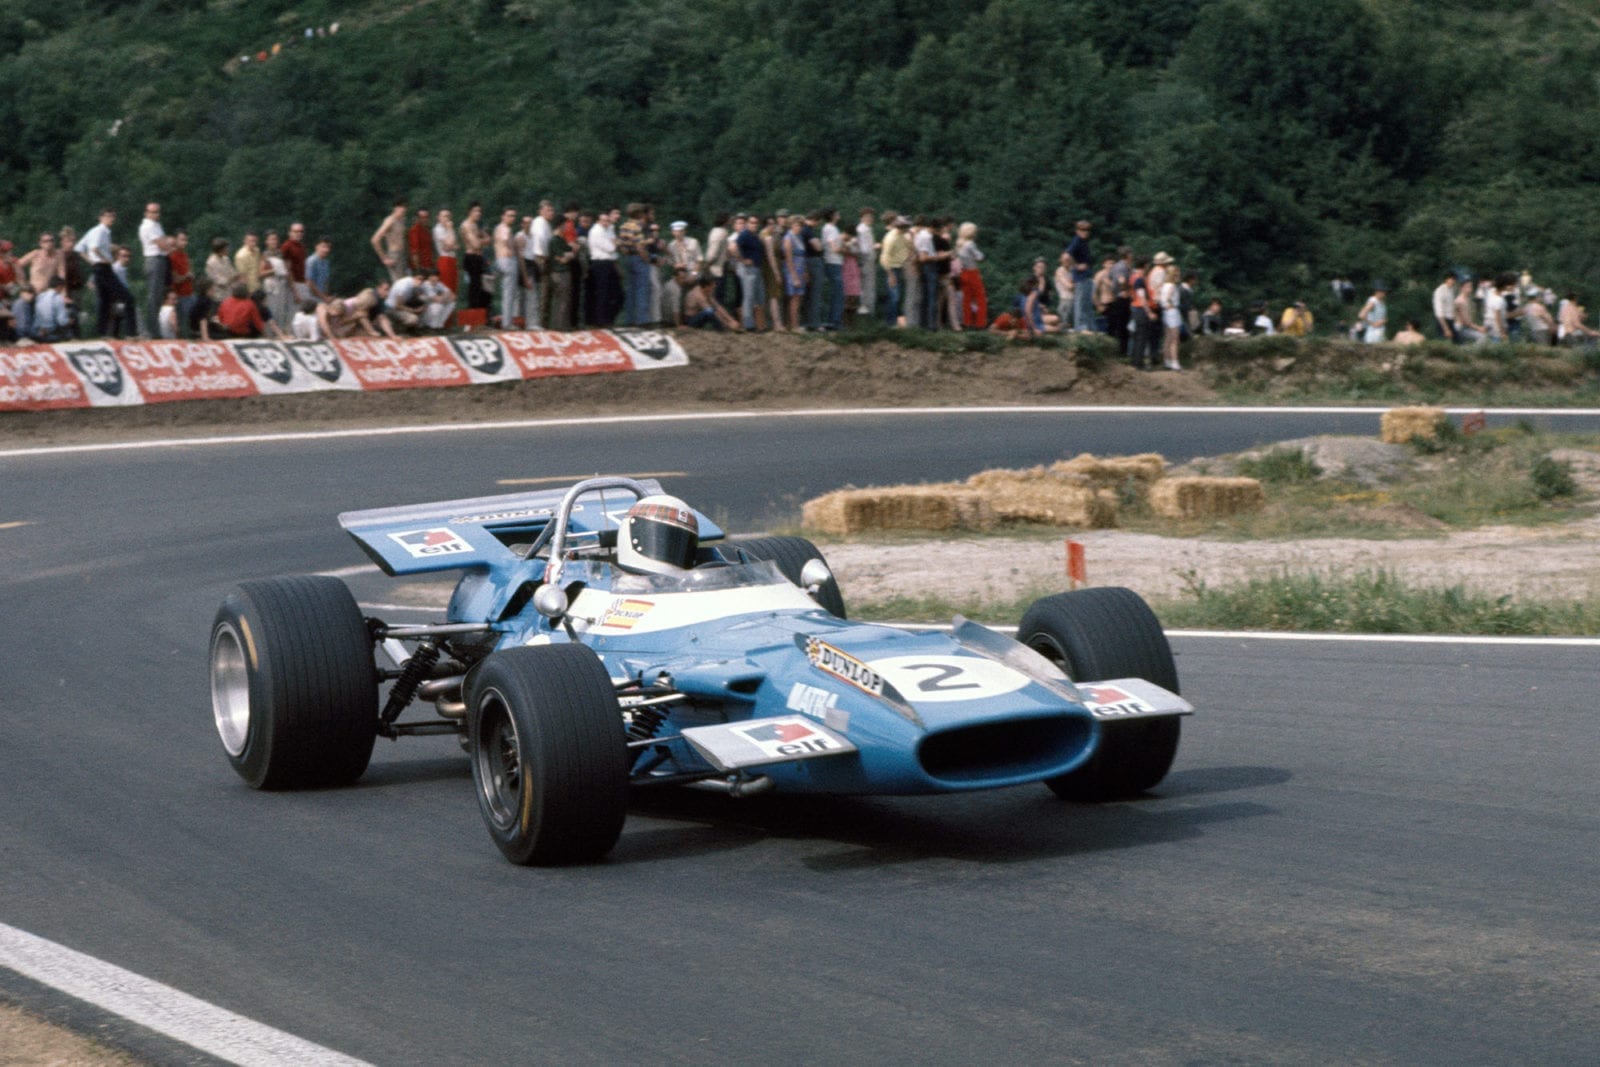 Jackie Stewart in his Matra at the 1969 French Grand Prix.